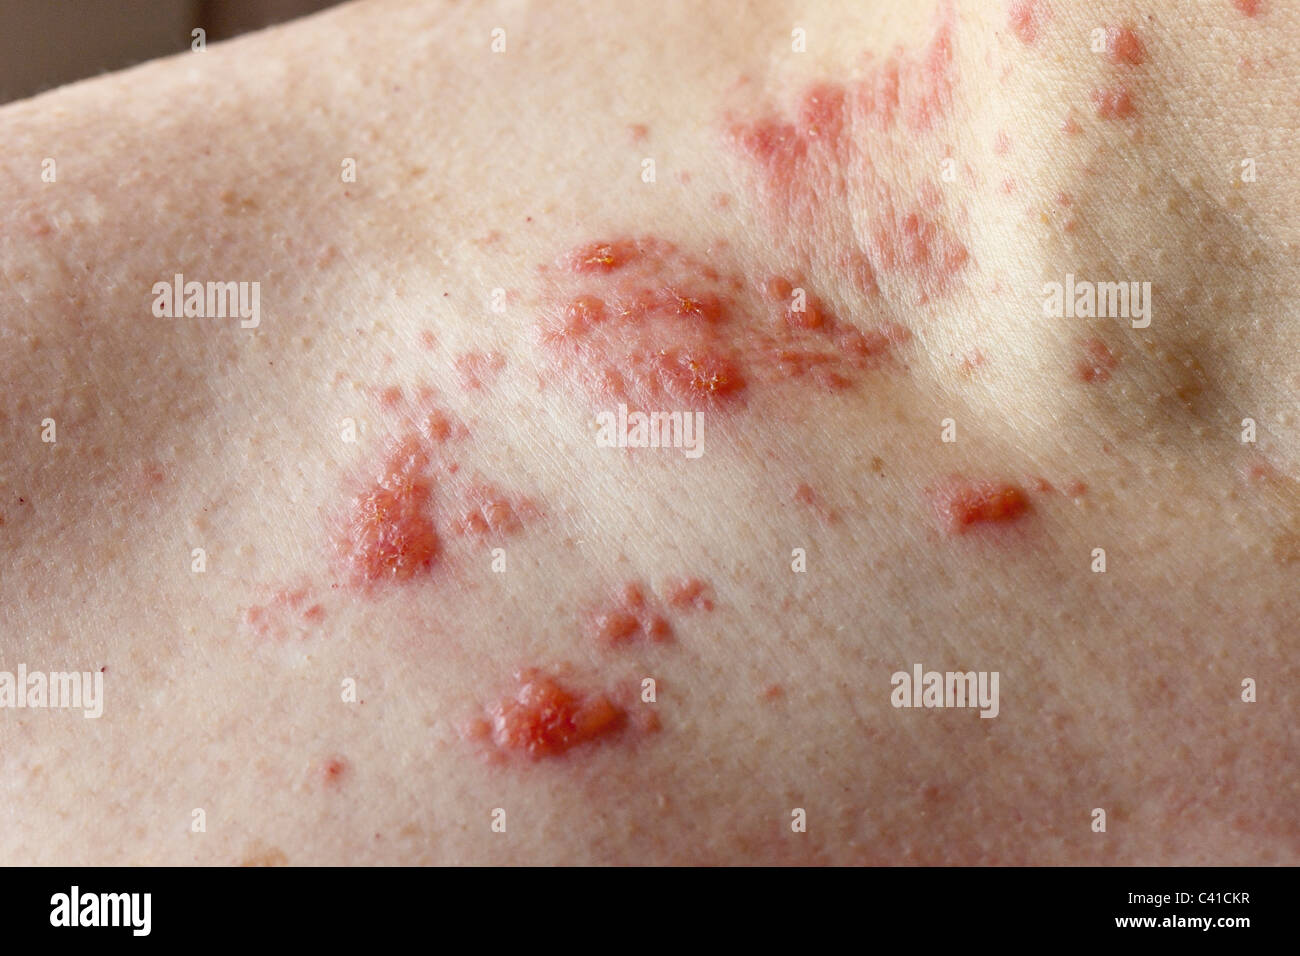 Poison Ivy Rash. An itchy red rash of poison ivy on a man's neck and shoulder. Stock Photo